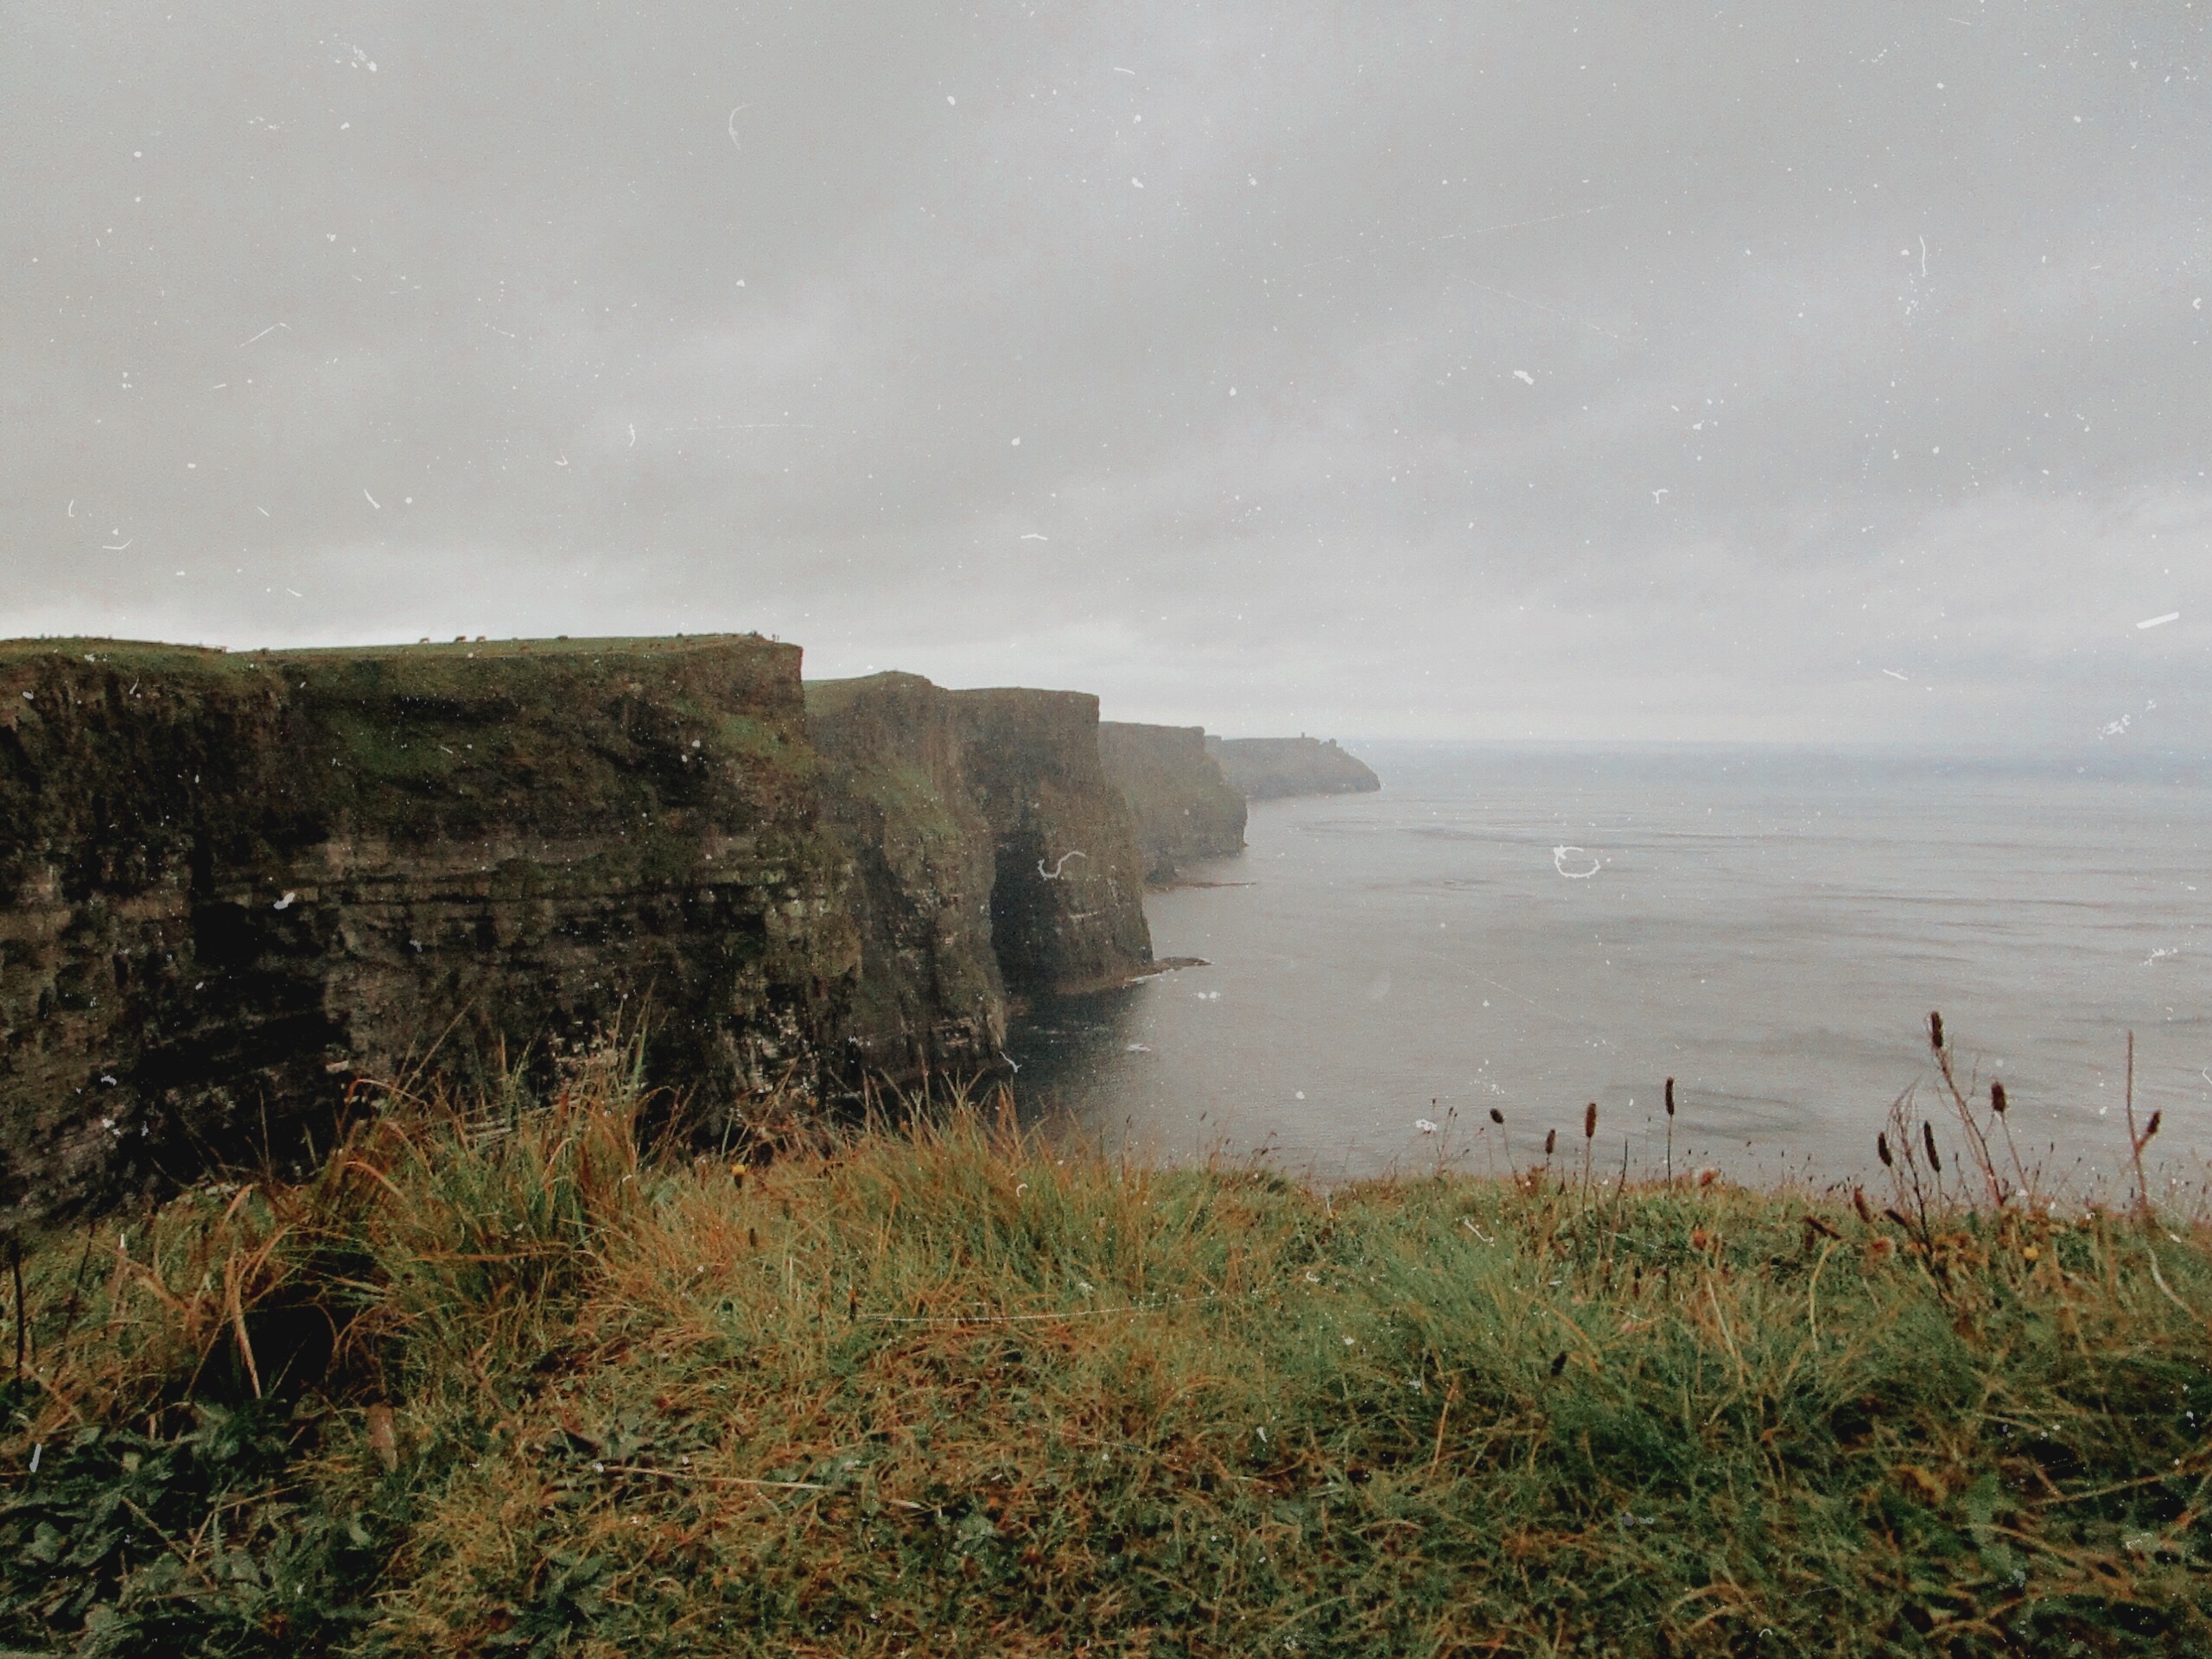 Foggy day at the Cliffs of Moher in Ireland